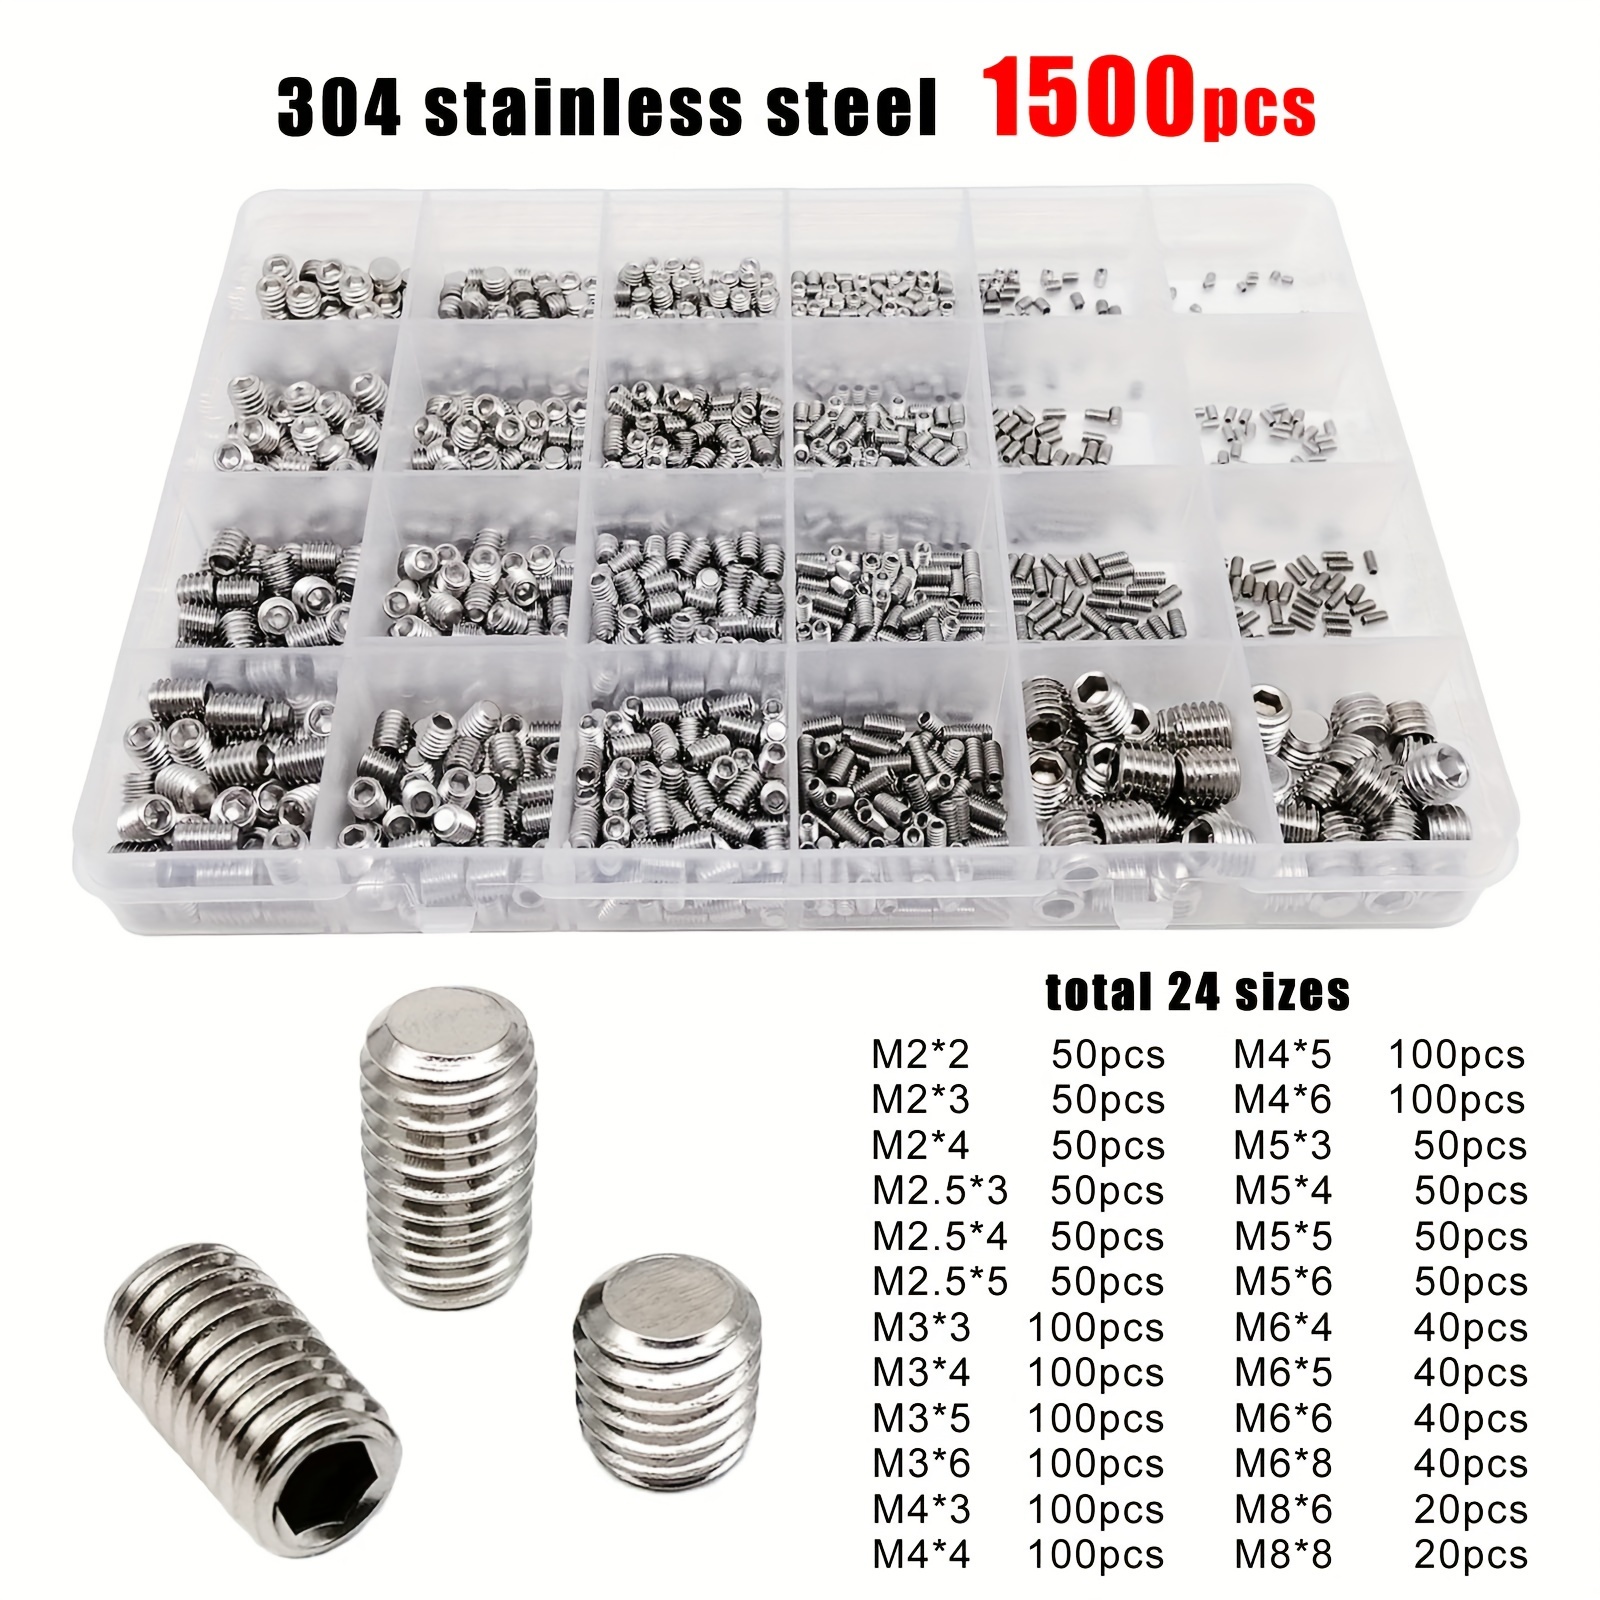 

Stainless Steel Hex Socket Head Cap Screws & Bolts - M2 To M8, Full Thread, Black Finish, Durable 304 Grade - 500/1500pc Set With Storage Case